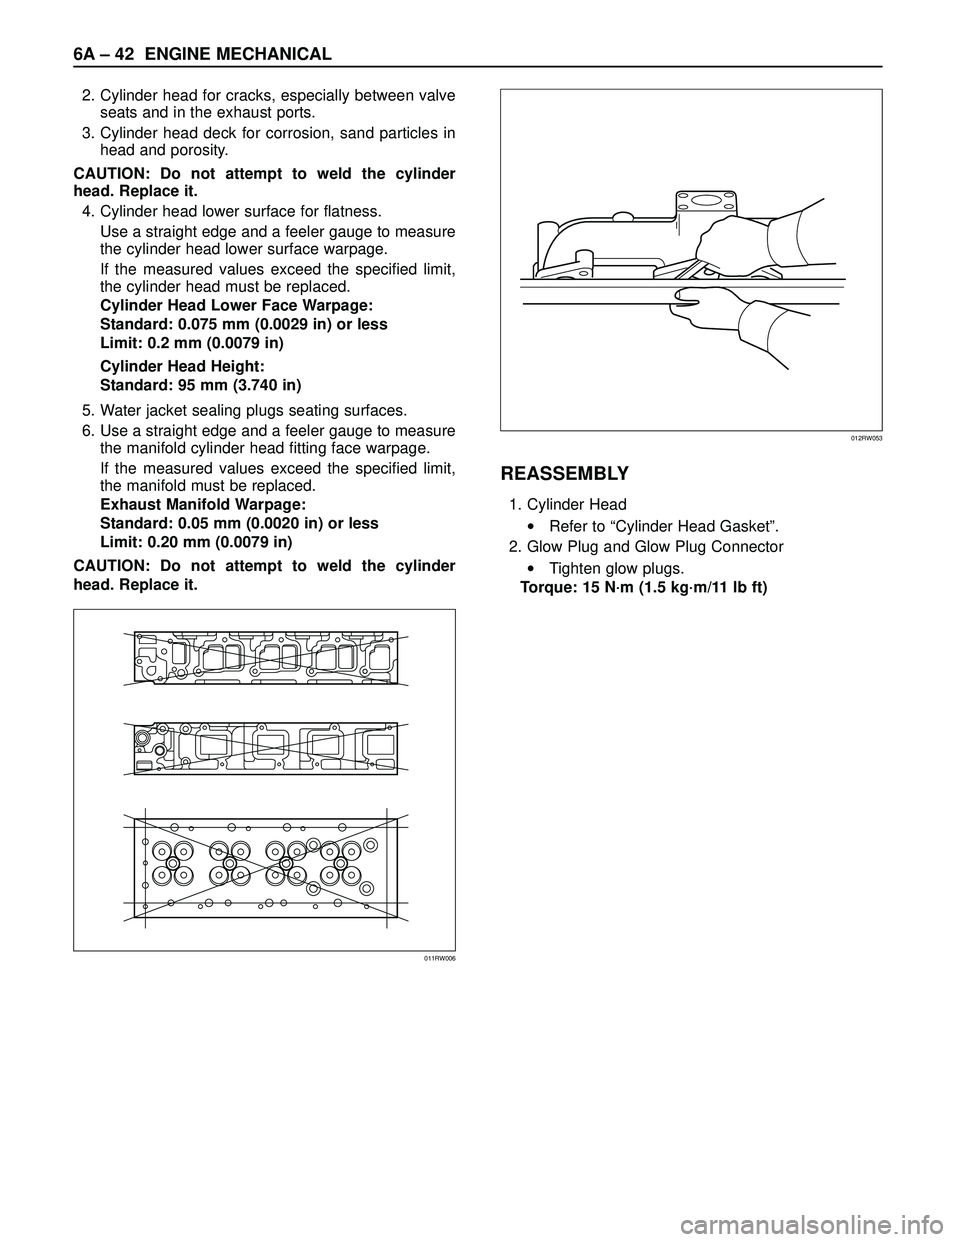 ISUZU TROOPER 1998  Service Repair Manual 6A – 42 ENGINE MECHANICAL
2. Cylinder head for cracks, especially between valve
seats and in the exhaust ports.
3. Cylinder head deck for corrosion, sand particles in
head and porosity.
CAUTION: Do 